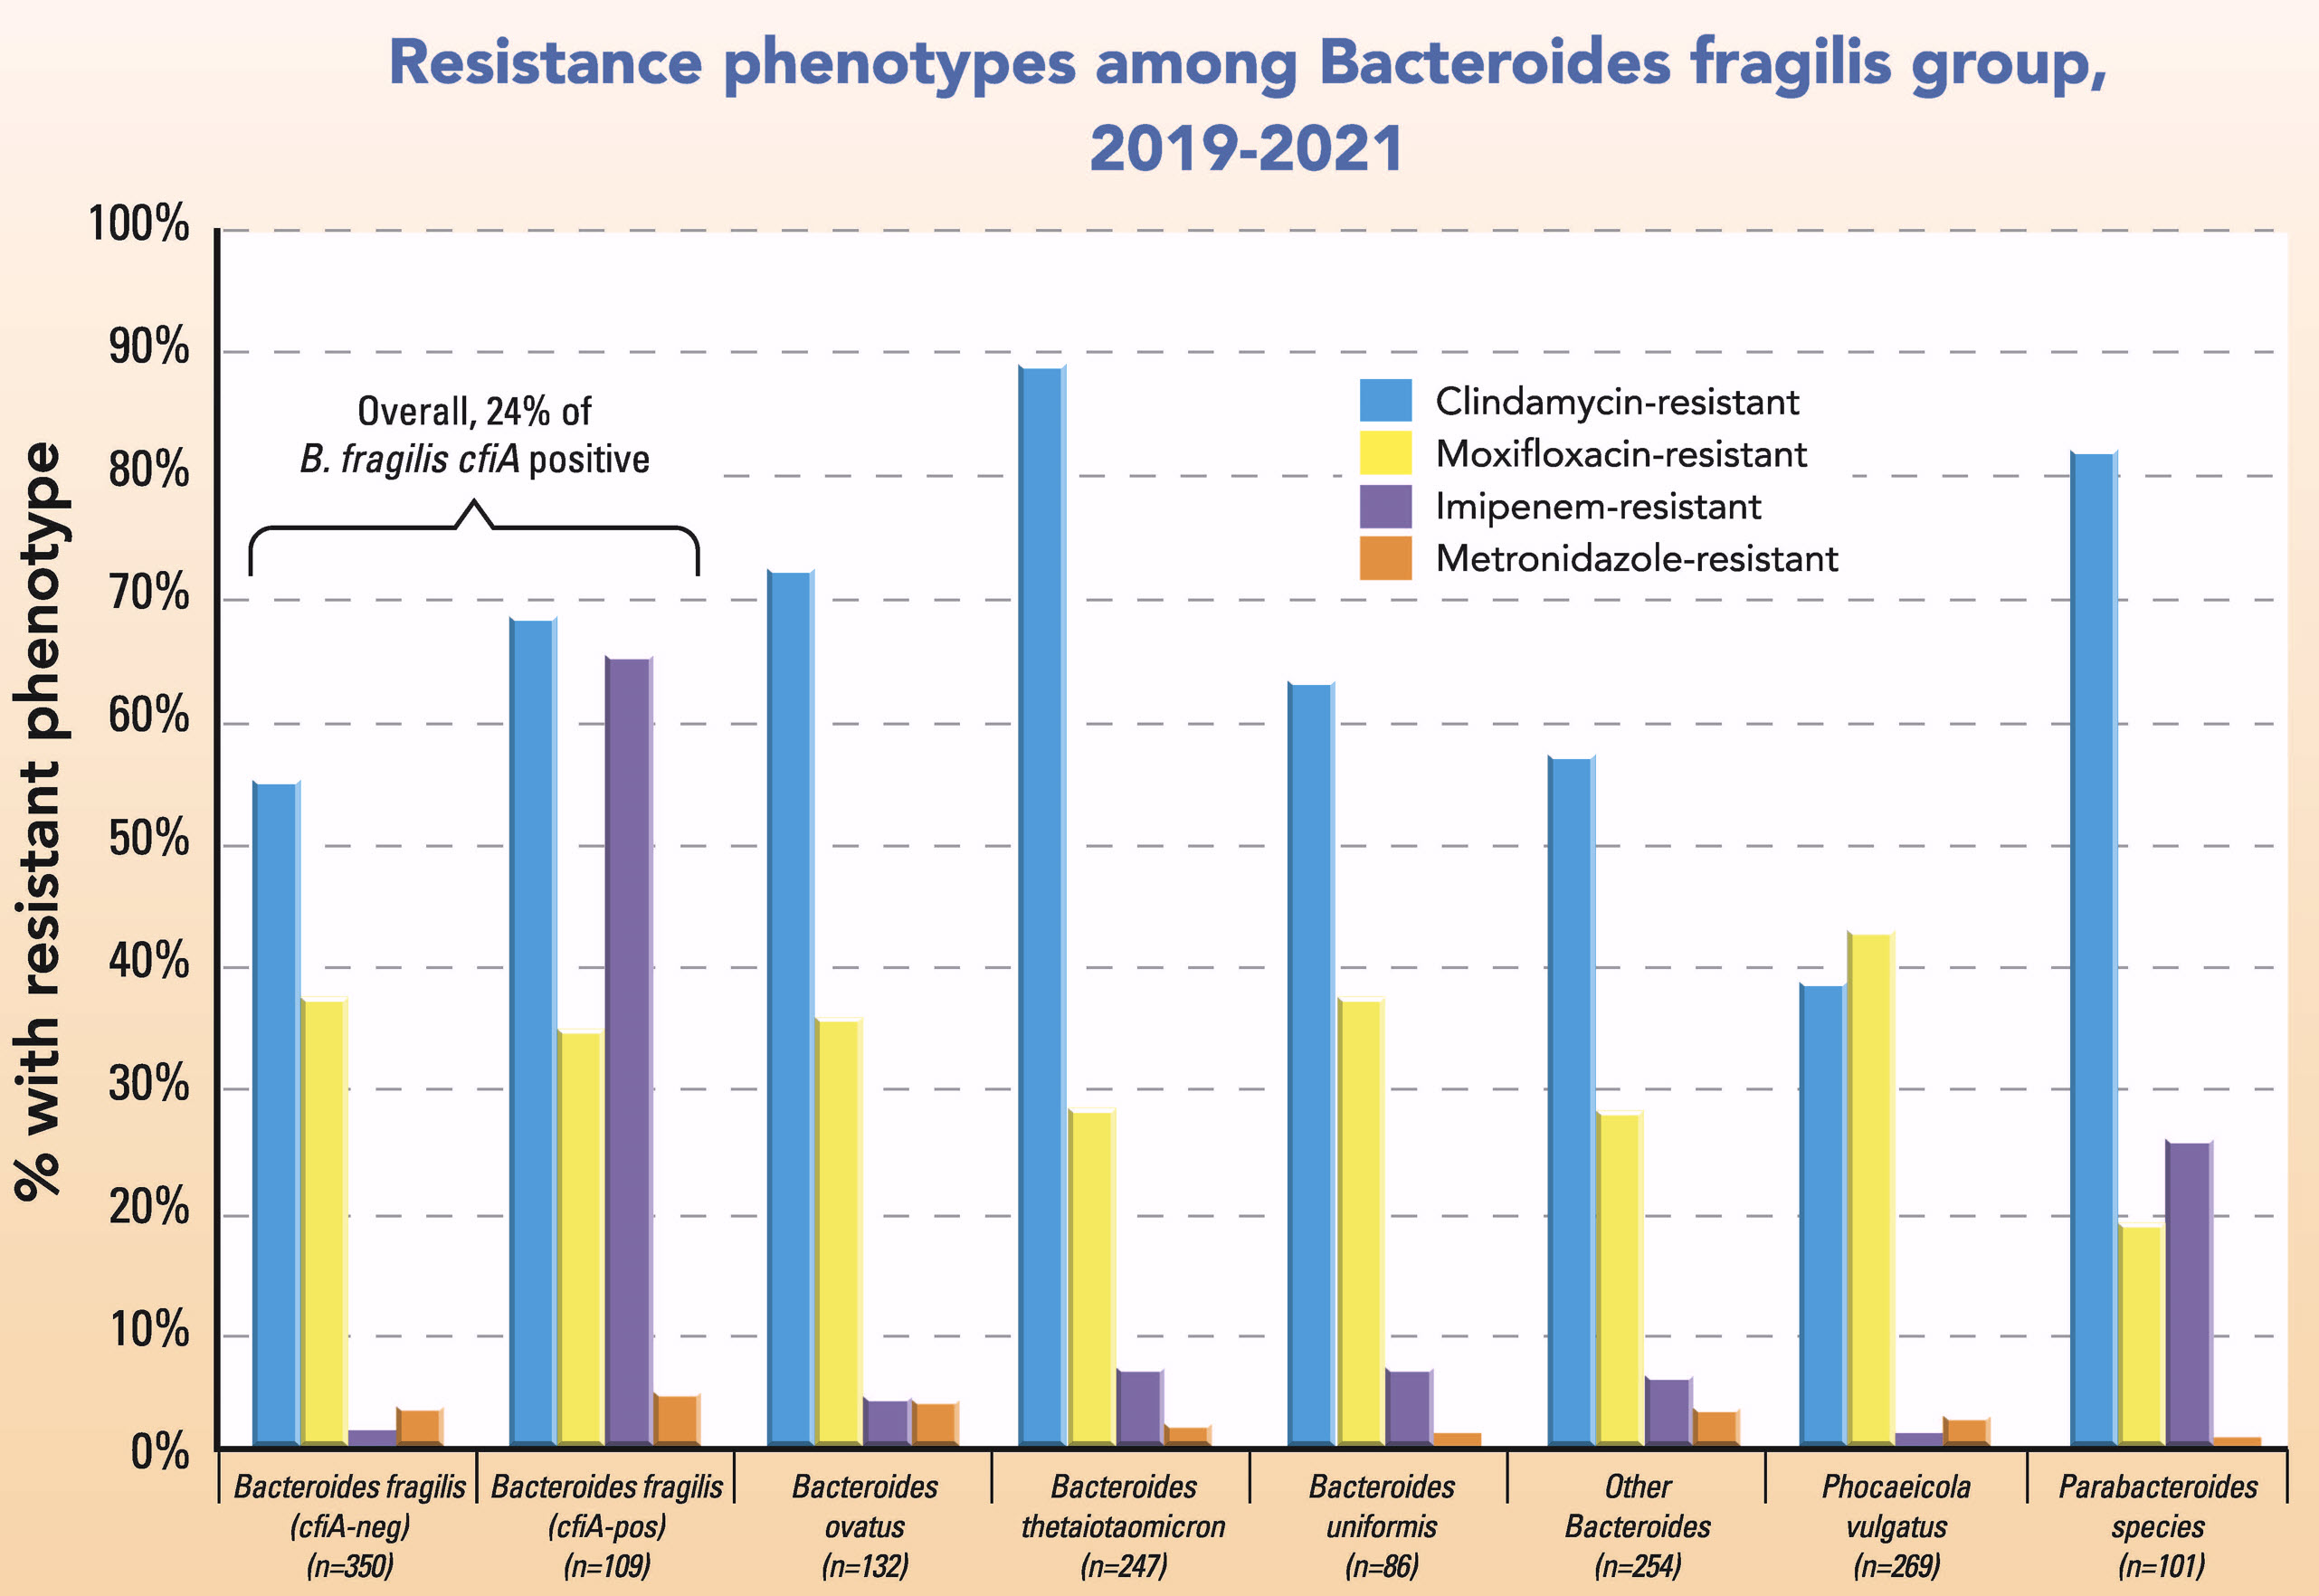 Figure HKW-4. Resistance phenotypes among Bacteroides fragilis group, 2019-2021